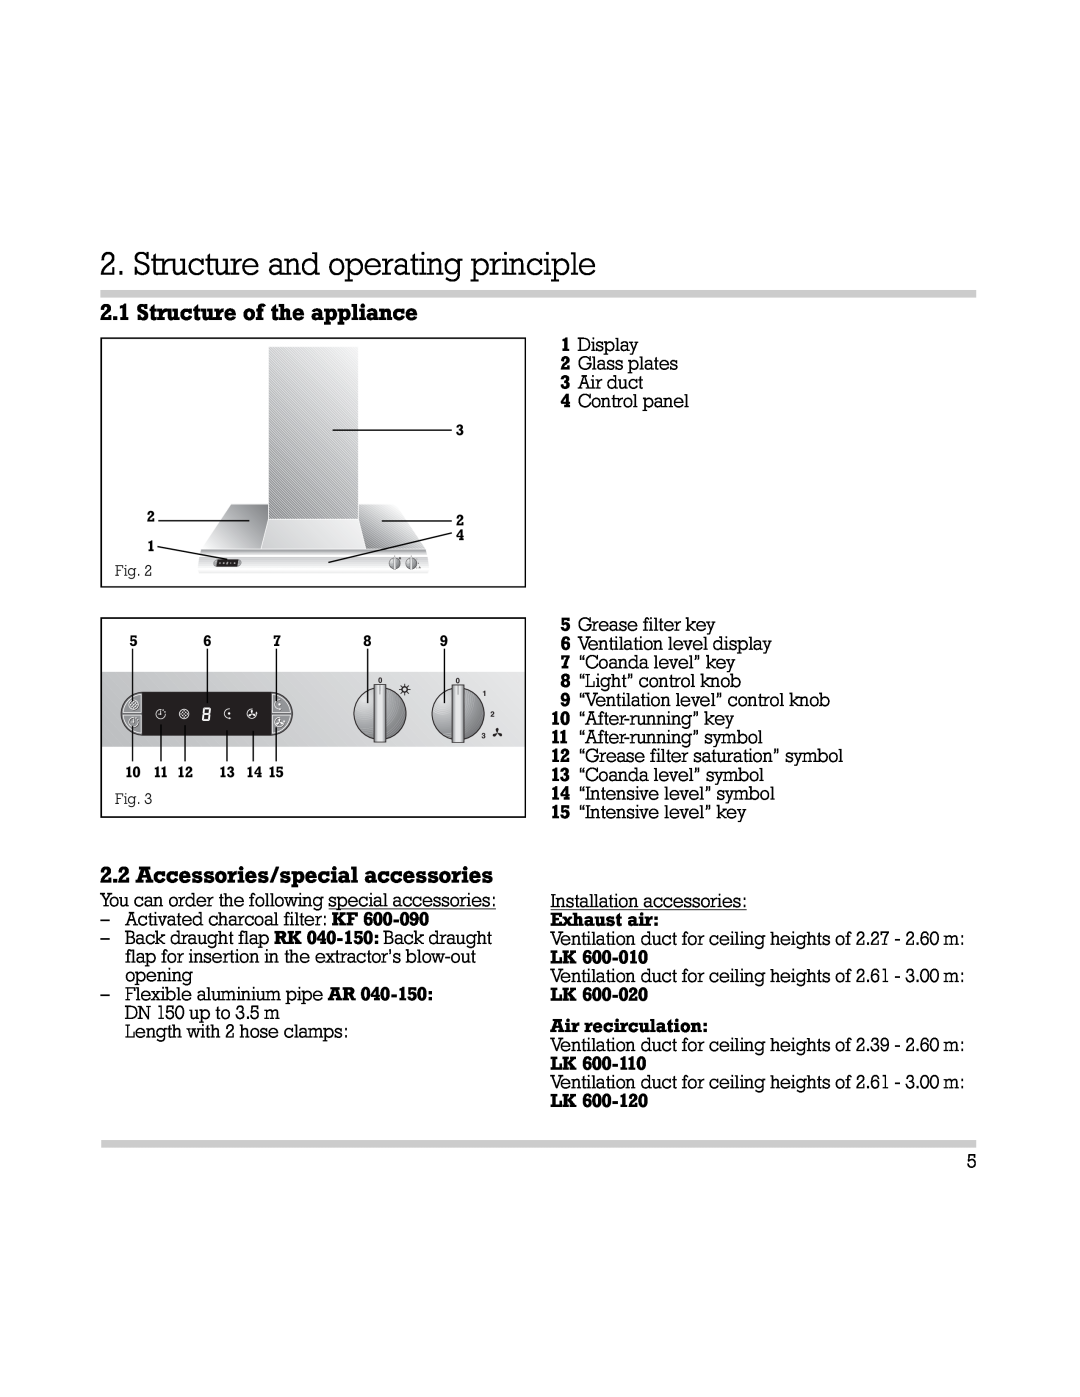 Gaggenau AH 600-190 manual Structure and operating principle, Structure of the appliance, Accessories/special accessories 